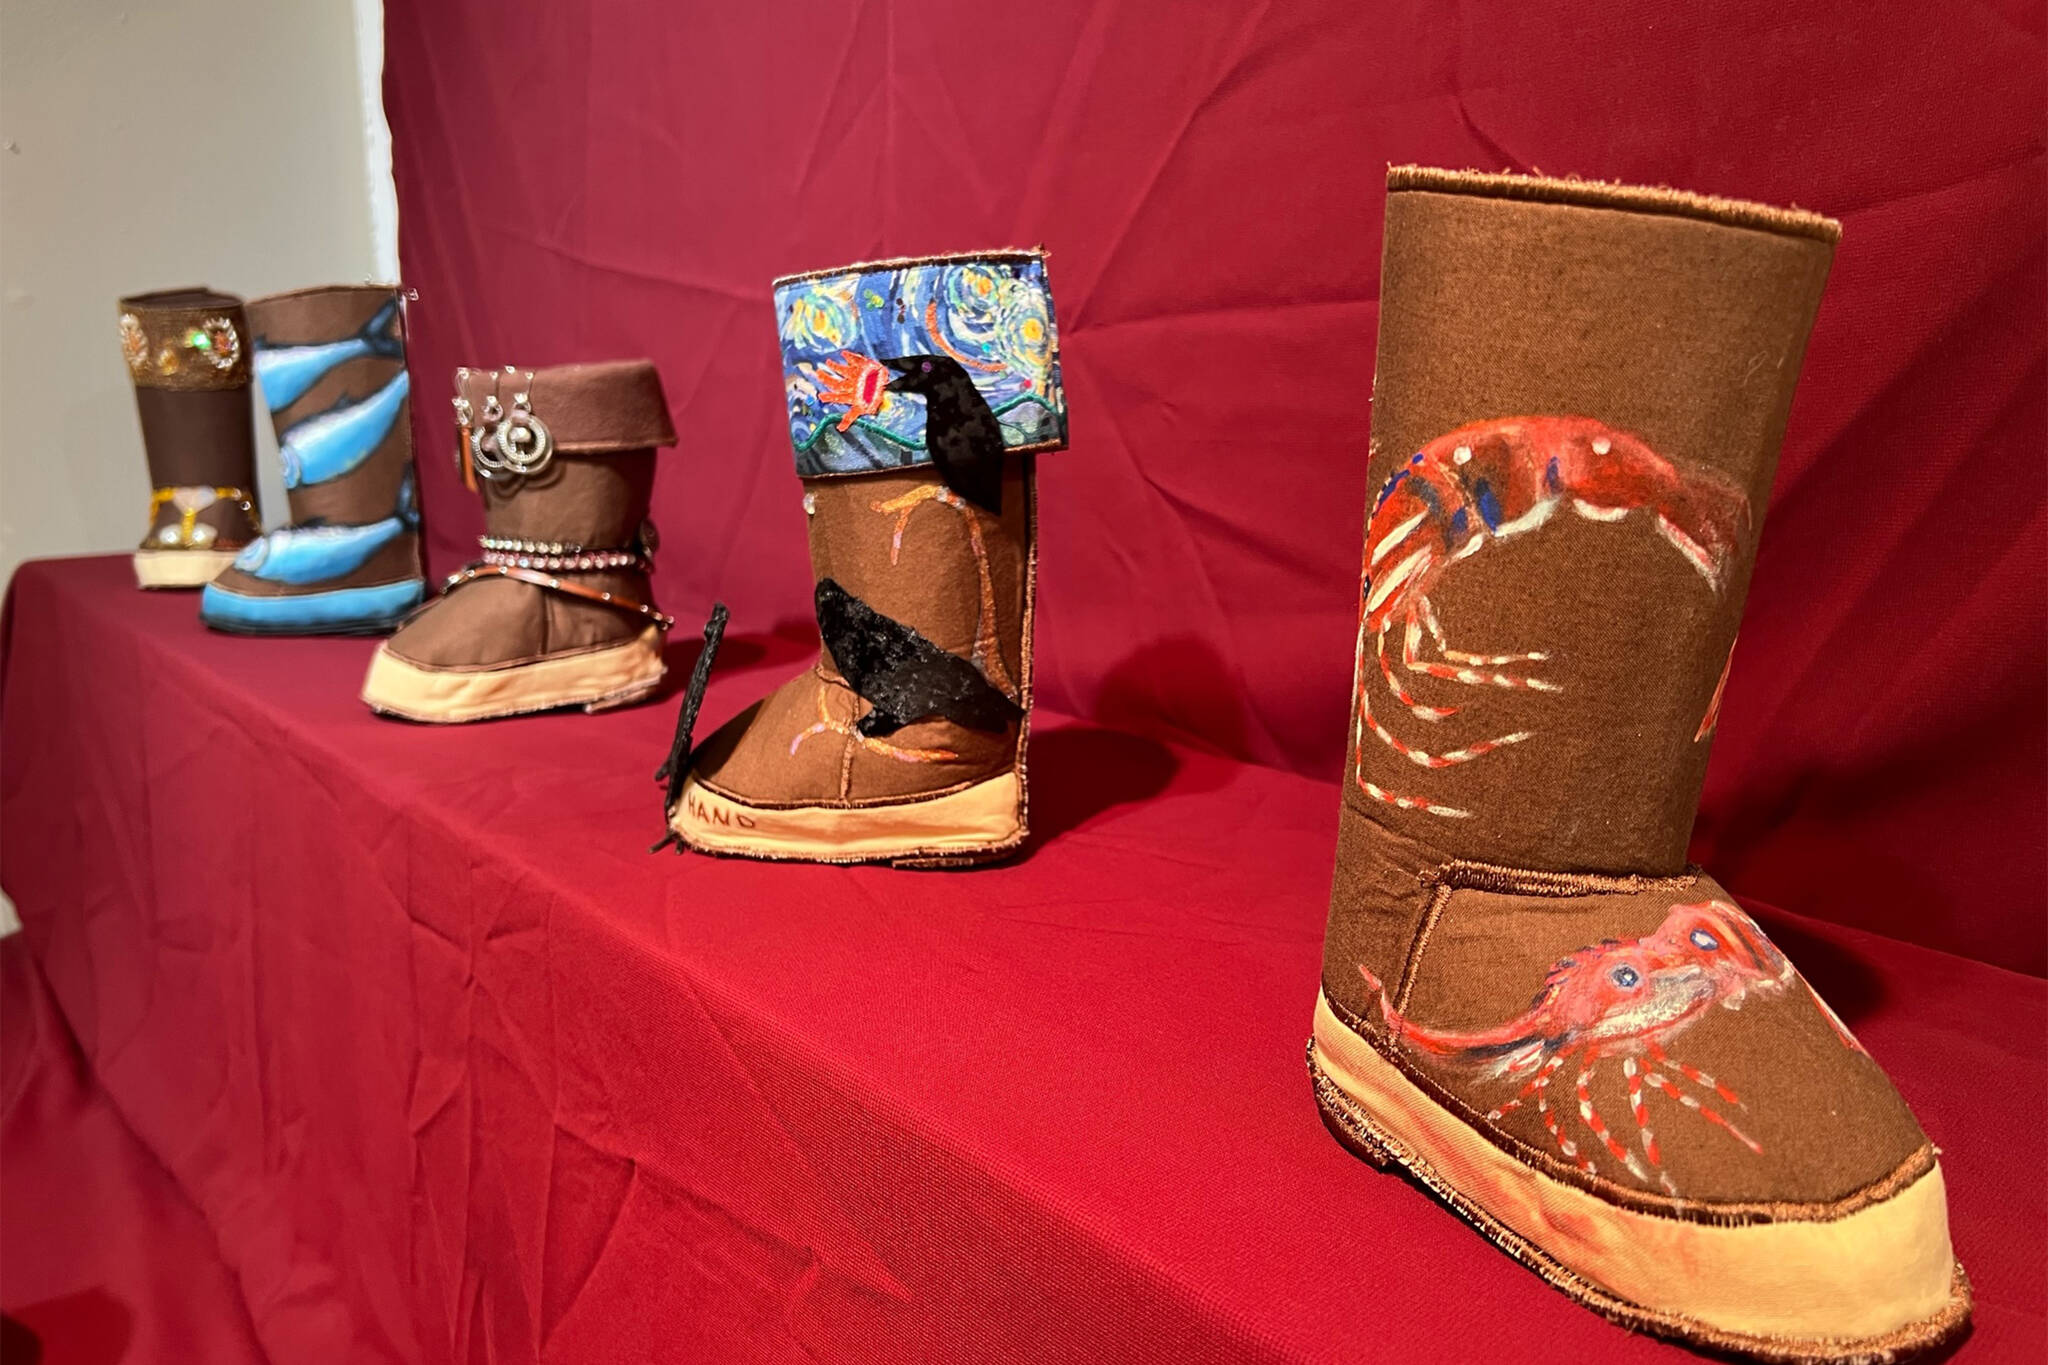 Courtesy Photo
Juneau Artists Gallery will hold a Unique Boot-Ique that feature a silent auction fundraiser for local nonprofits for the month of March.